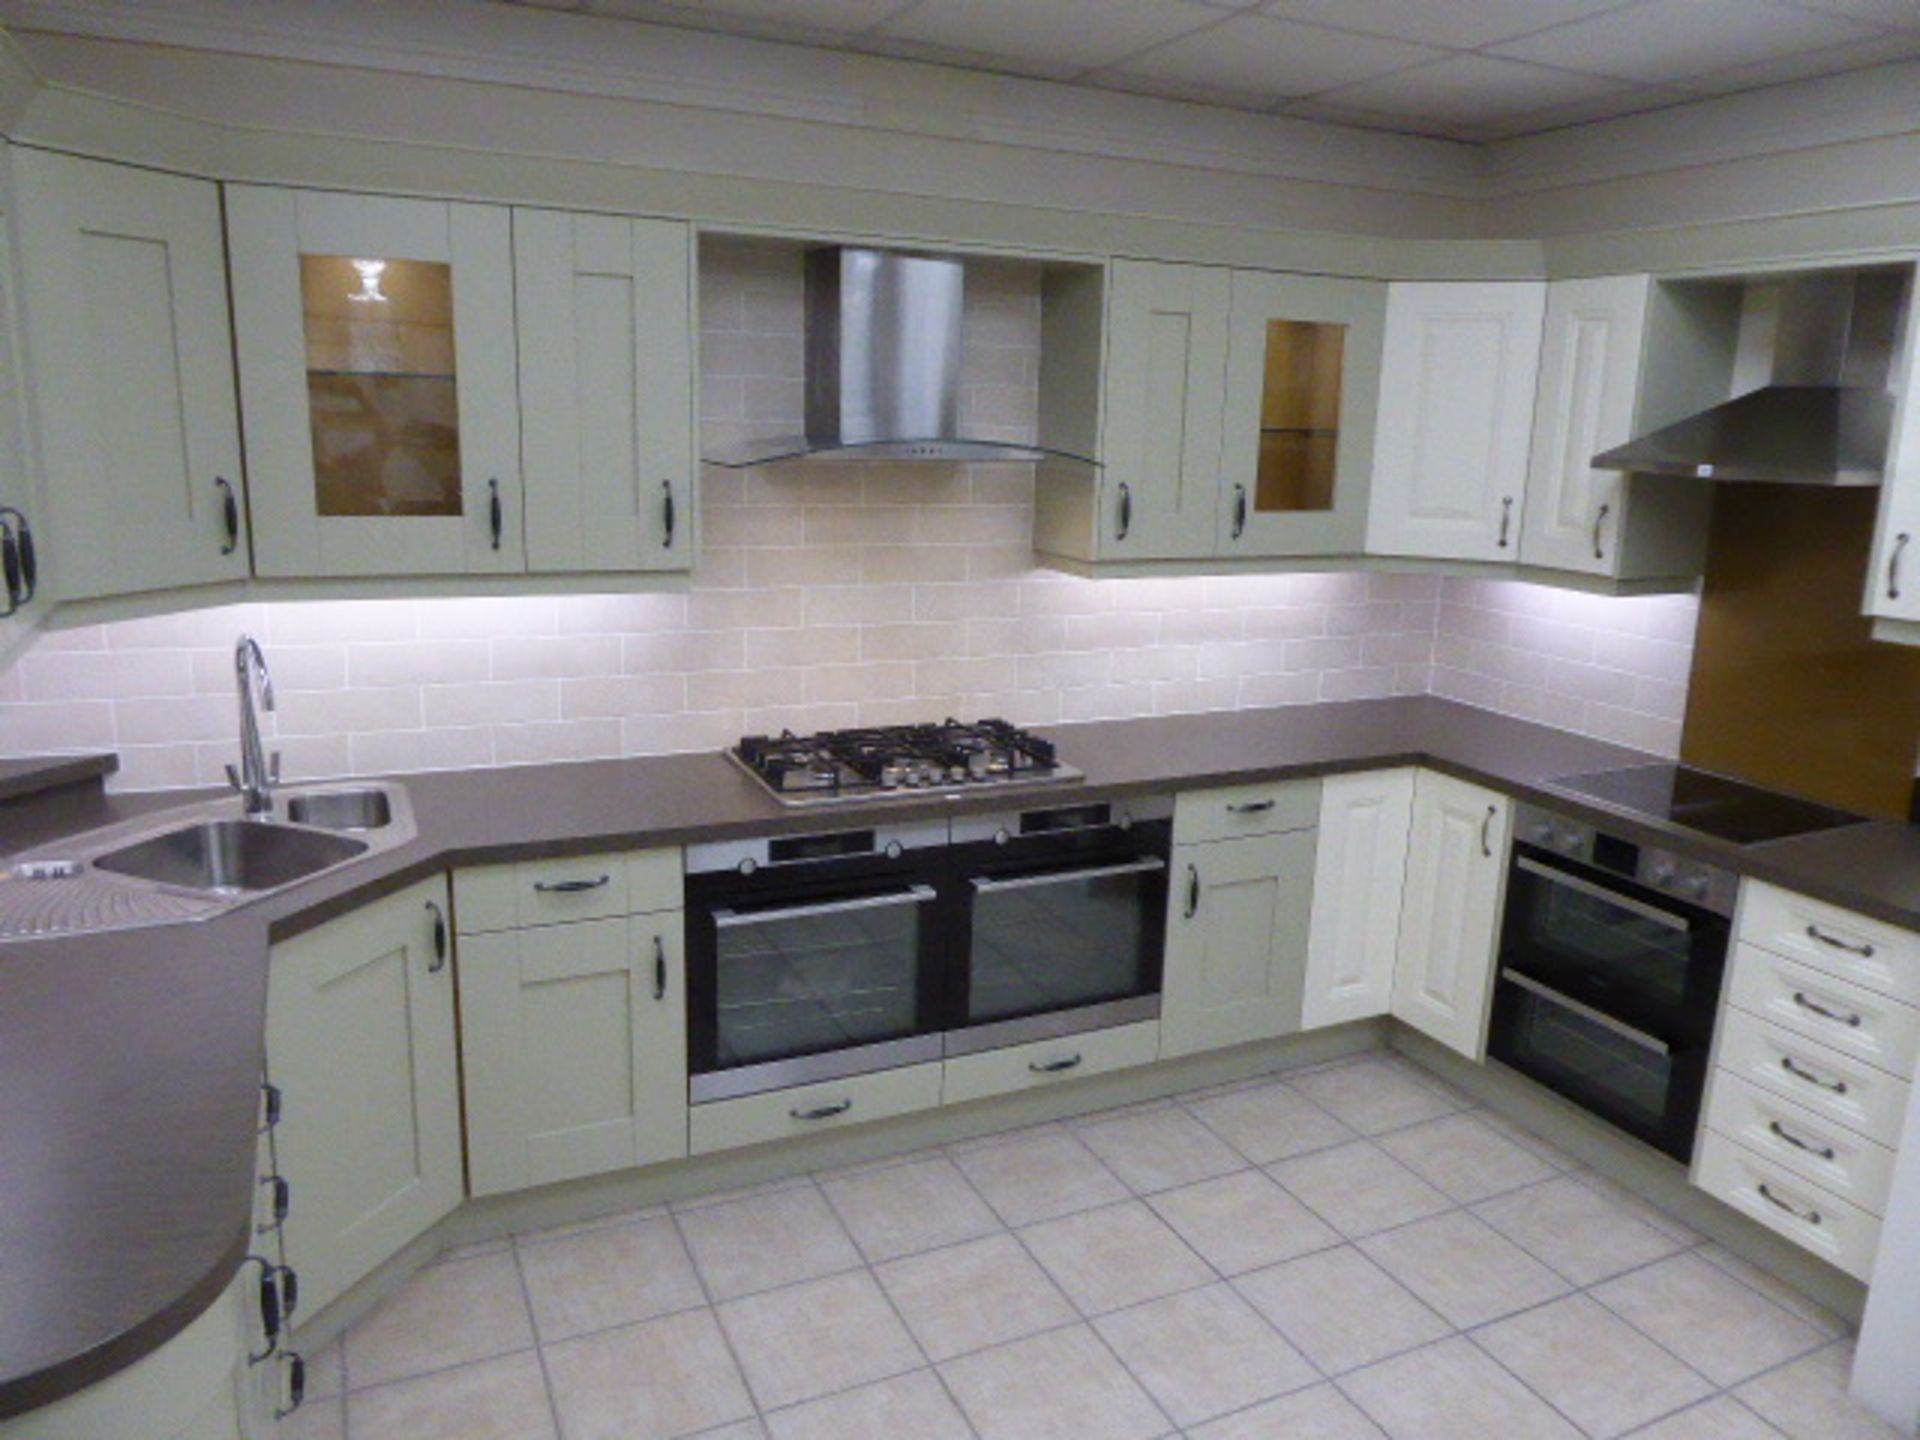 Coleridge and Milbourne sage kitchen with sand stone effect laminate worktops. Max measurement is